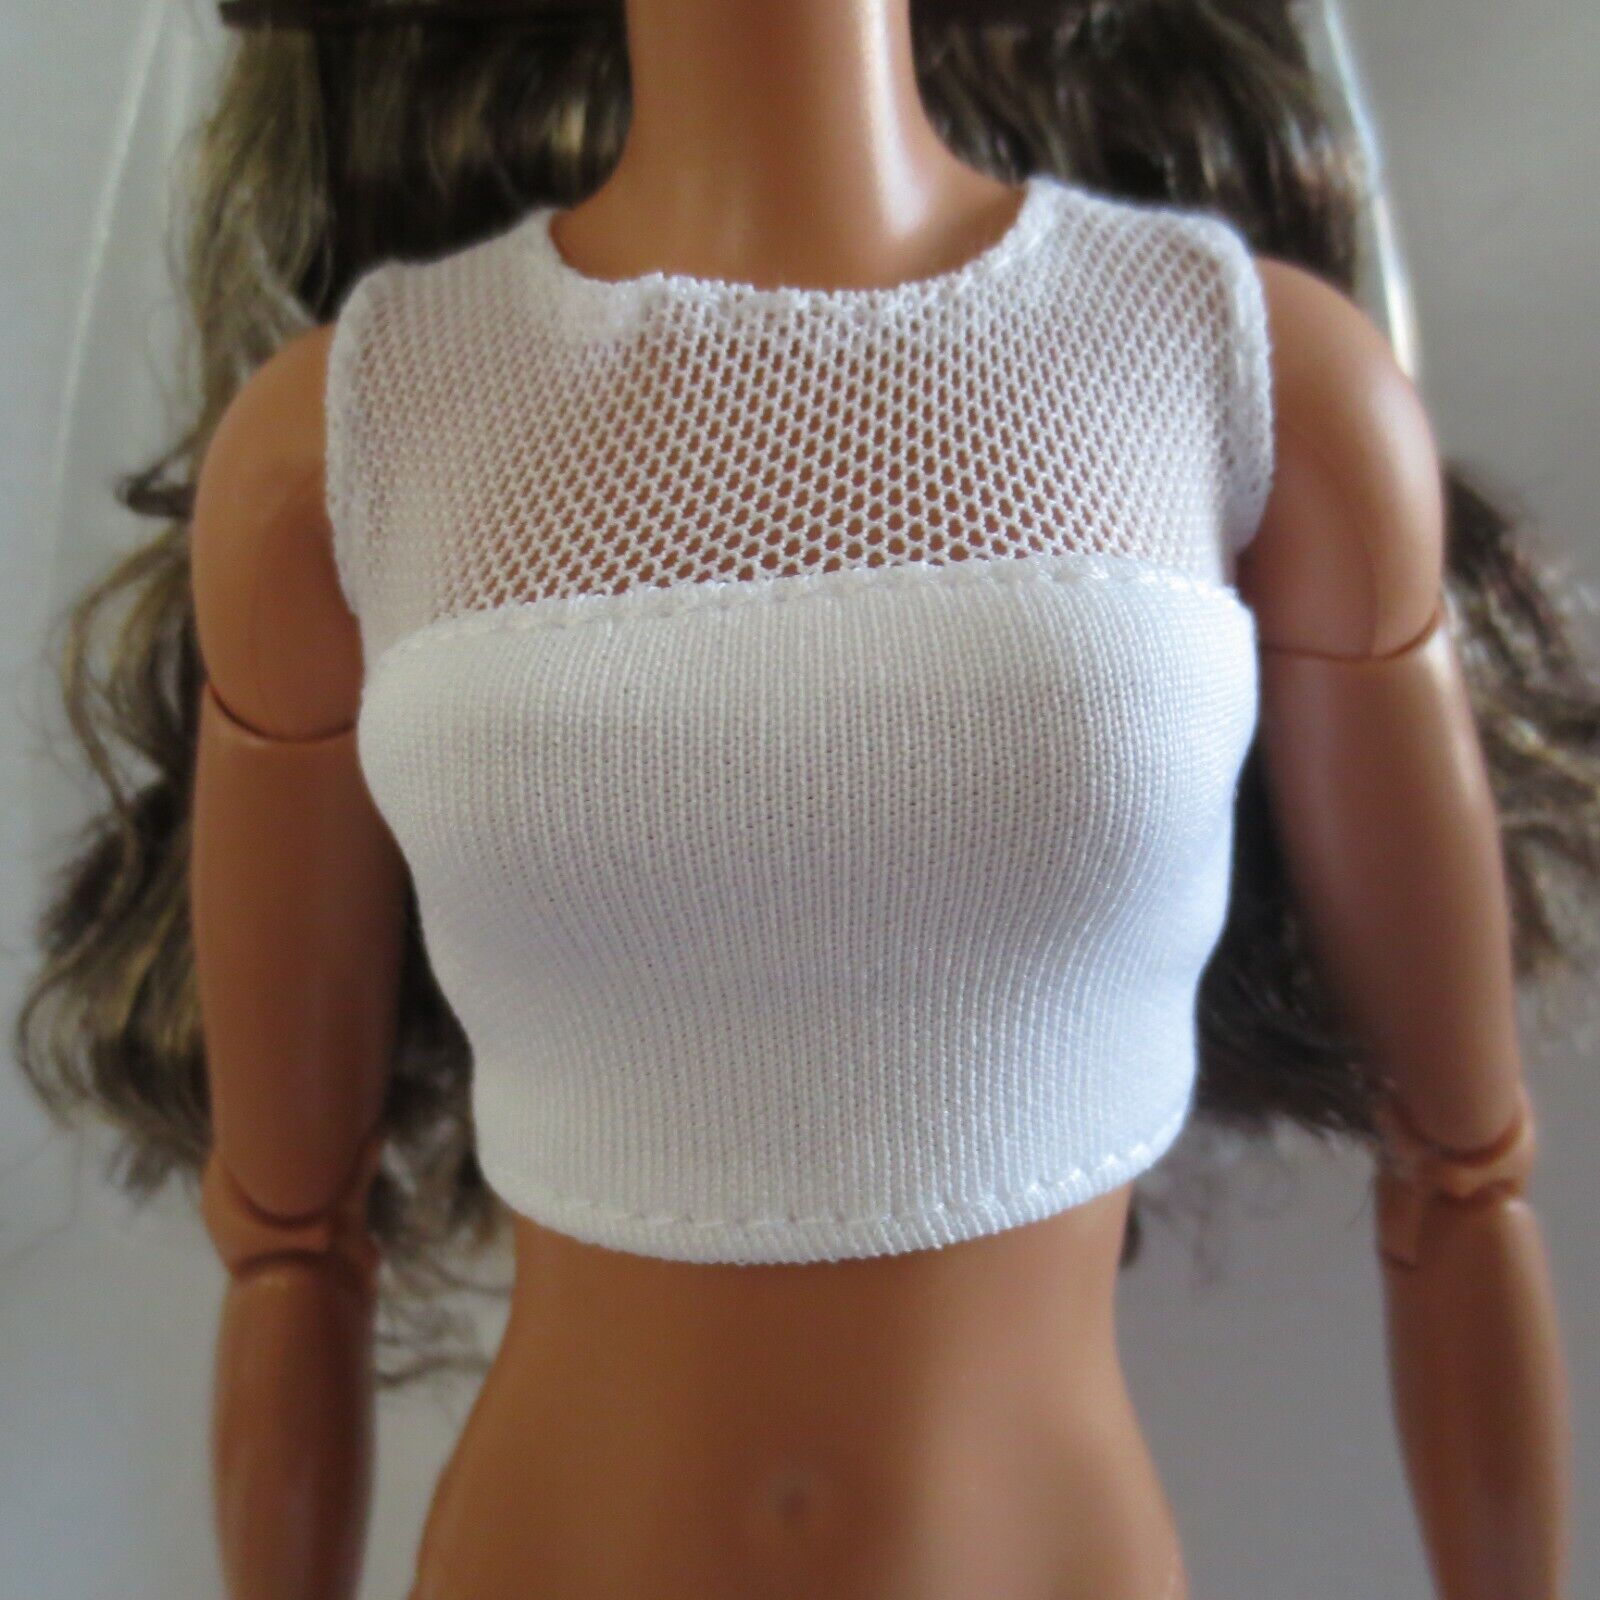 NEW 2021 Barbie Signature Looks Made To Move Doll Clothing White Mesh Crop Top